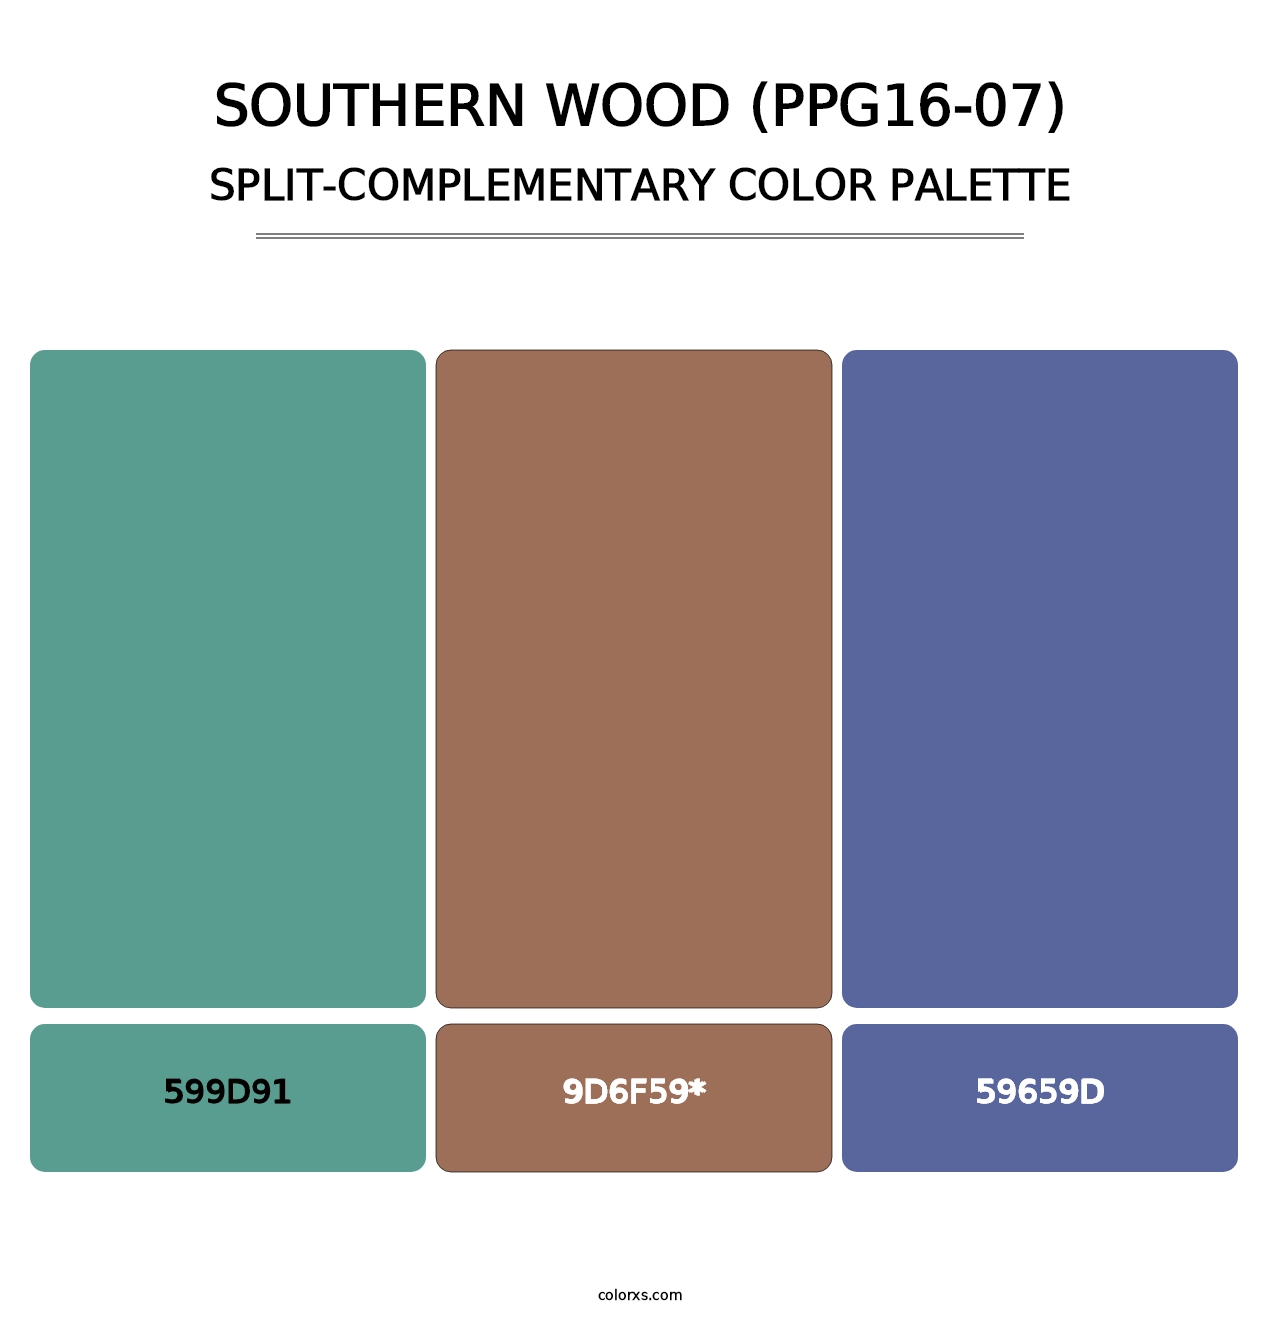 Southern Wood (PPG16-07) - Split-Complementary Color Palette